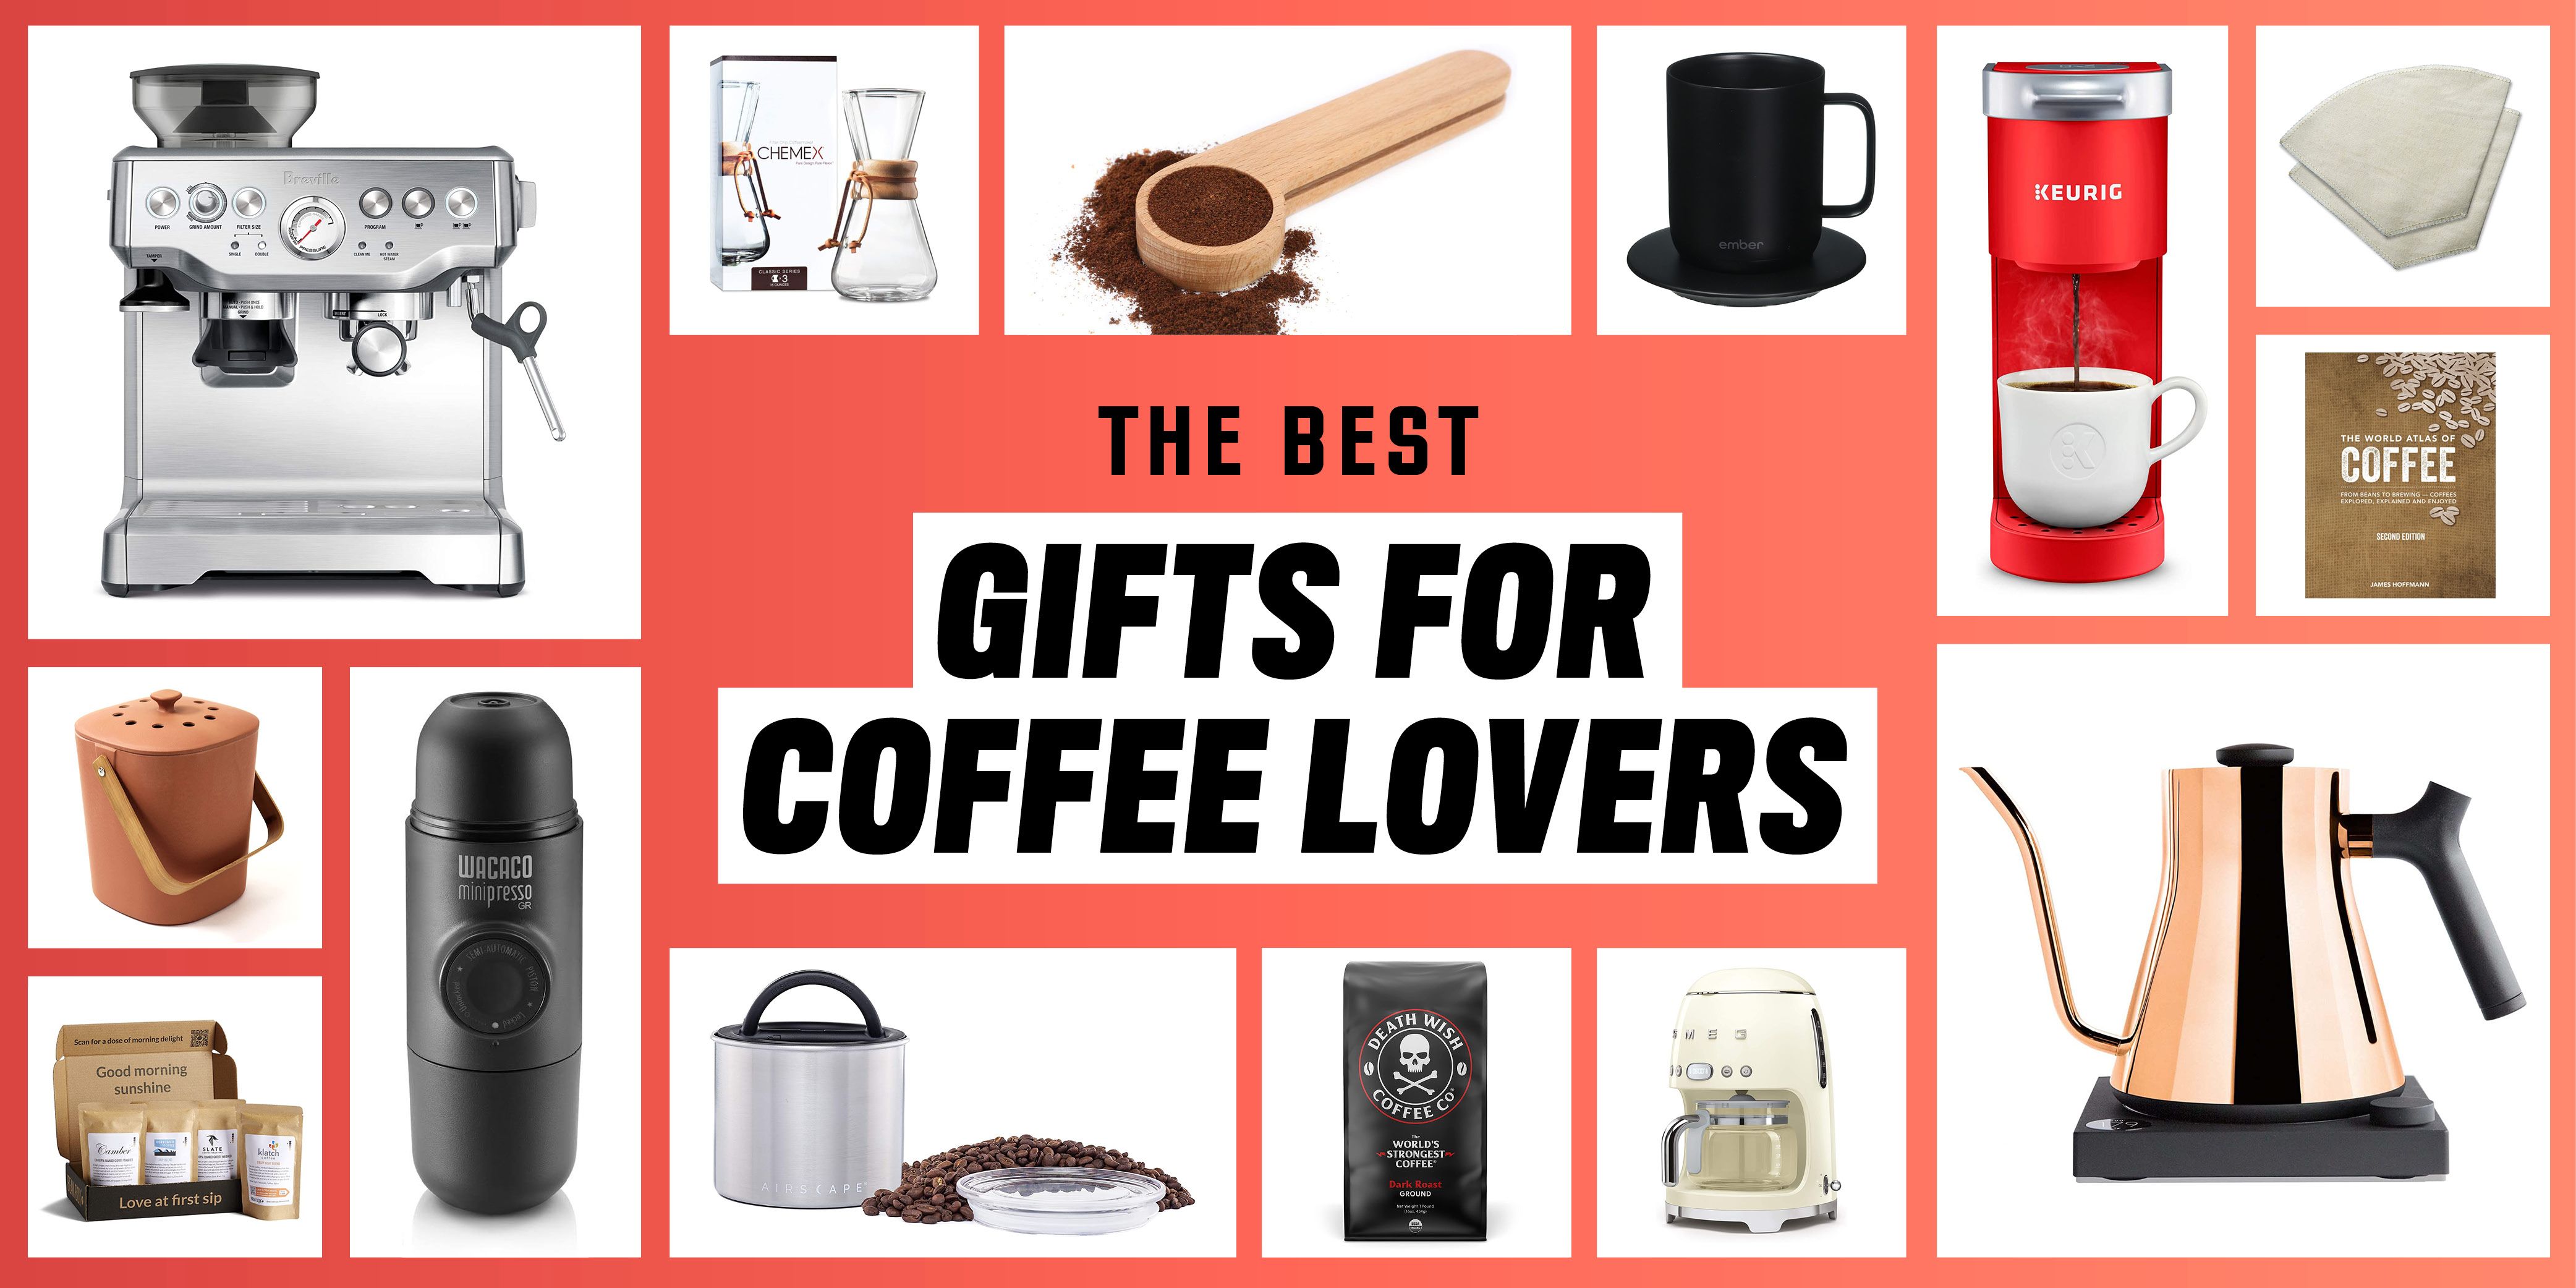 https://hips.hearstapps.com/hmg-prod/images/run-gifts-for-coffee-lovers-1631723757.jpg